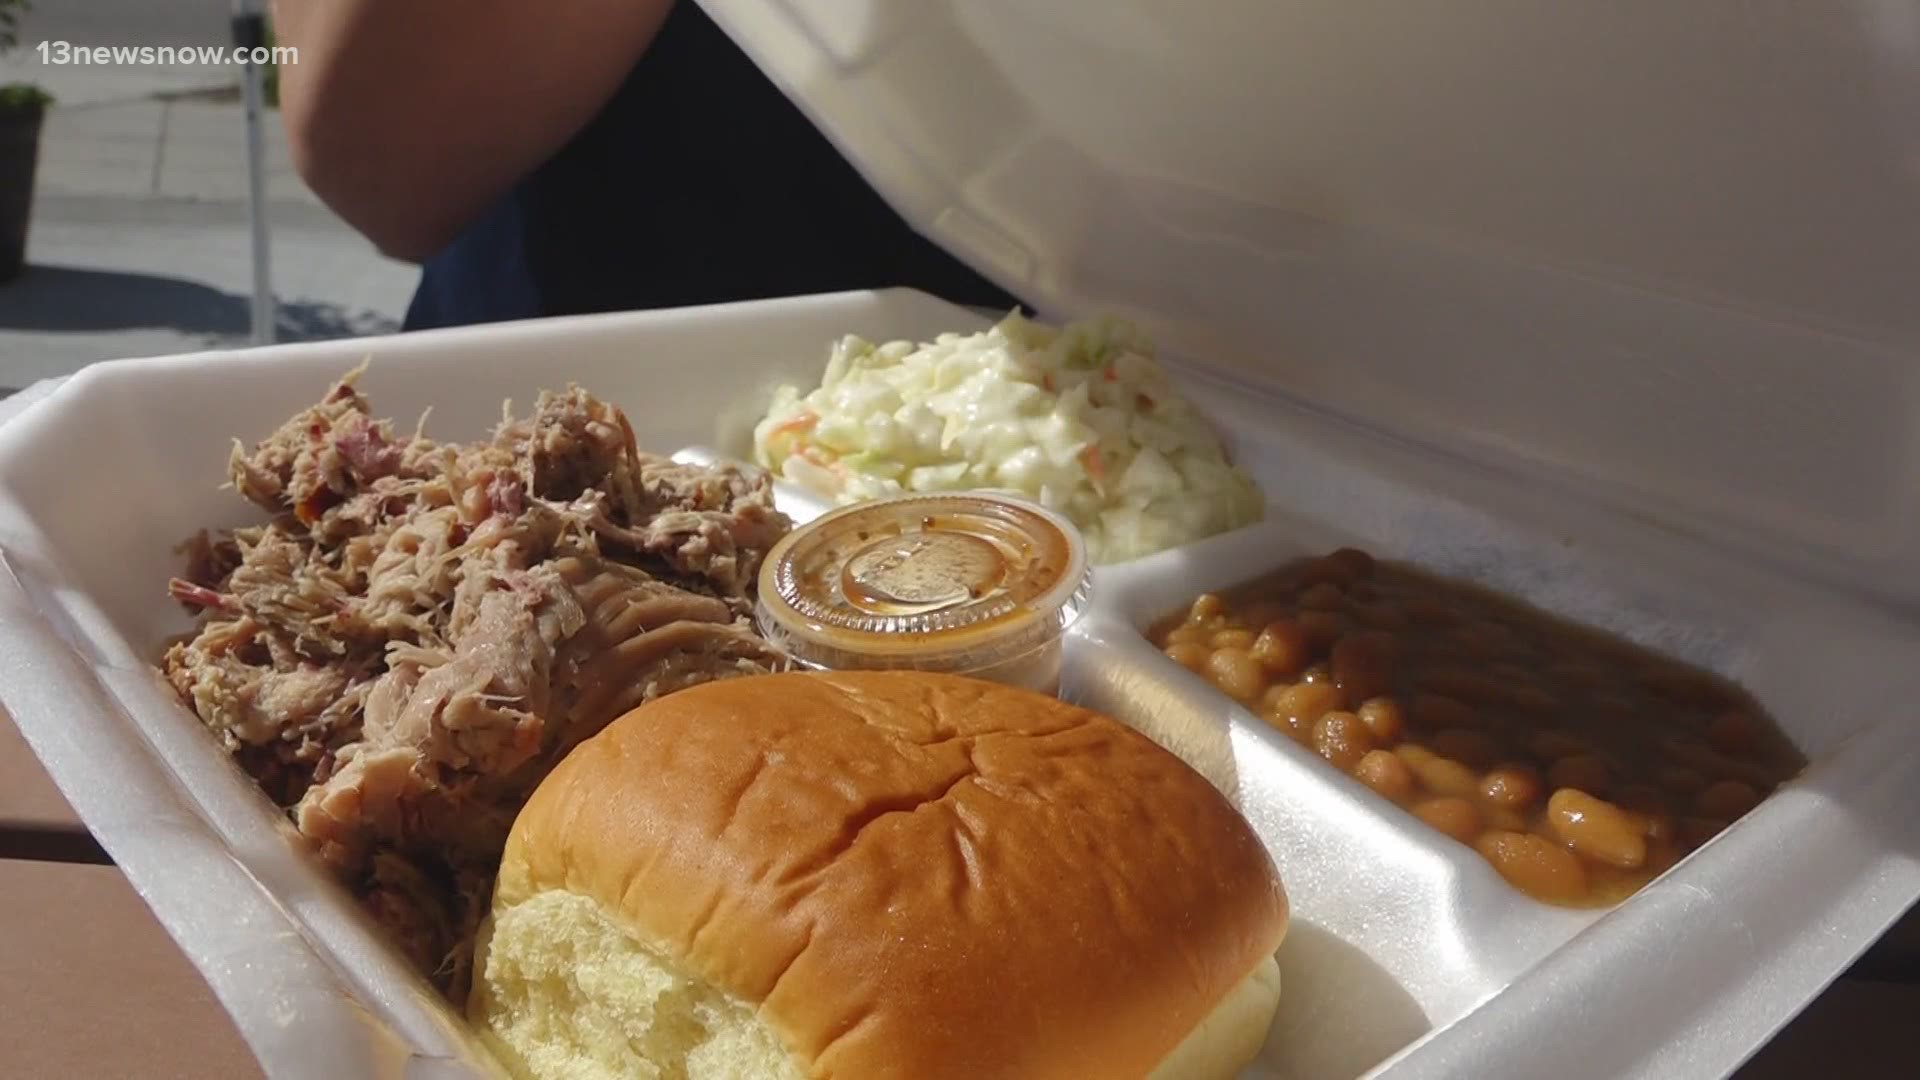 You need to try their pull pork, housemade vinegar-based sauces, and desserts.